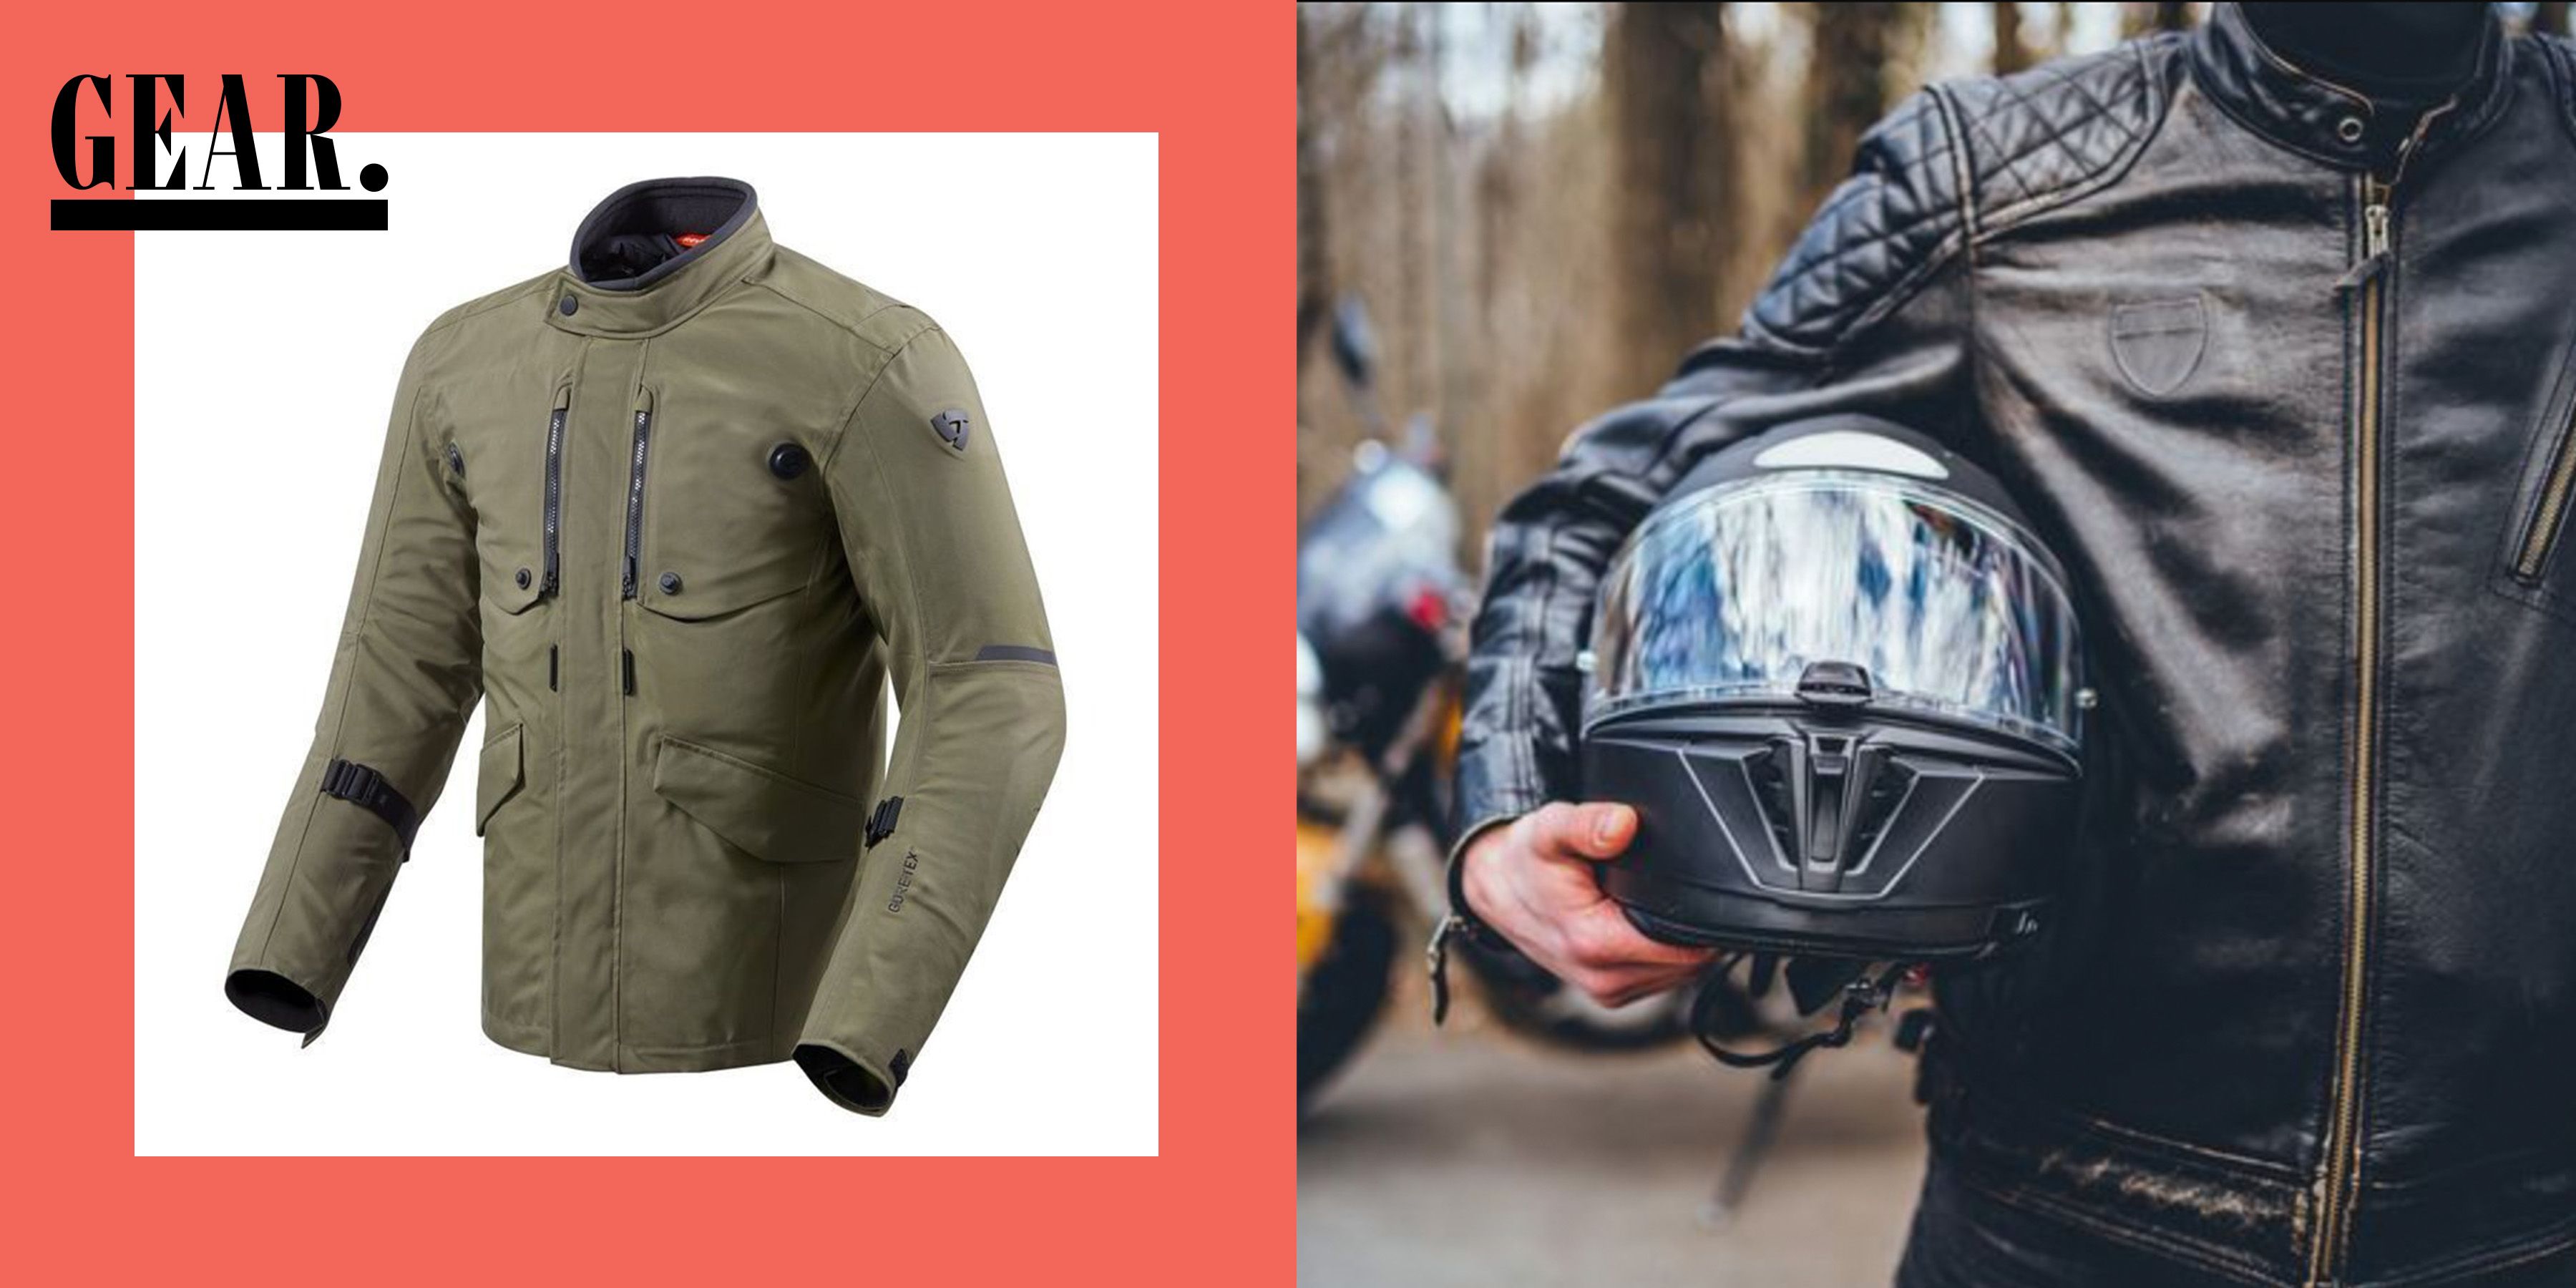 These Are the Absolute Best Motorcycle Jackets, According to the Pros